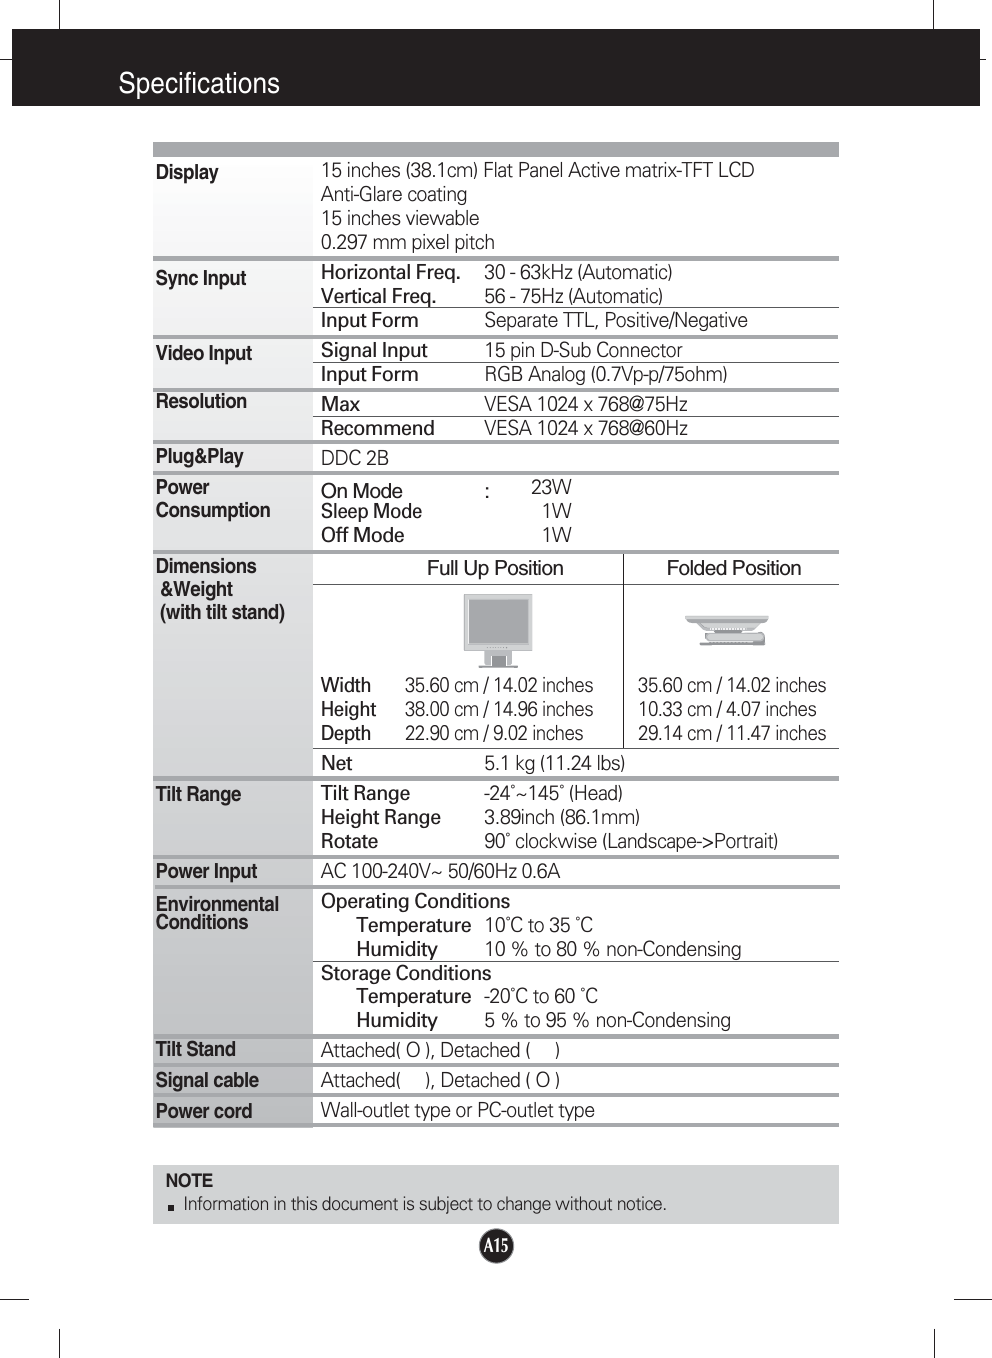 A15SpecificationsNOTEInformation in this document is subject to change without notice.15 inches (38.1cm) Flat Panel Active matrix-TFT LCD Anti-Glare coating15 inches viewable0.297 mm pixel pitchHorizontal Freq. 30 - 63kHz (Automatic)Vertical Freq. 56 - 75Hz (Automatic)Input Form Separate TTL, Positive/NegativeSignal Input 15 pin D-Sub ConnectorInput Form RGB Analog (0.7Vp-p/75ohm)Max VESA 1024 x 768@75Hz Recommend VESA 1024 x 768@60HzDDC 2BOn Mode :23WSleep Mode≤1WOff Mode ≤1WFull Up Position Folded PositionWidth 35.60 cm / 14.02 inches 35.60 cm / 14.02 inchesHeight 38.00 cm / 14.96 inches 10.33 cm / 4.07 inchesDepth 22.90 cm / 9.02 inches 29.14 cm / 11.47 inchesNet 5.1 kg (11.24 lbs)Tilt Range -24˚~145˚ (Head)Height Range 3.89inch (86.1mm)Rotate 90˚ clockwise (Landscape-&gt;Portrait)AC 100-240V~ 50/60Hz 0.6AOperating ConditionsTemperature 10˚C to 35 ˚CHumidity 10 % to 80 % non-CondensingStorage ConditionsTemperature -20˚C to 60 ˚CHumidity 5 % to 95 % non-CondensingAttached( O ), Detached (     )Attached(     ), Detached ( O )Wall-outlet type or PC-outlet typeDisplaySync InputVideo InputResolutionPlug&amp;PlayPowerConsumptionDimensions&amp;Weight(with tilt stand)Tilt RangePower InputEnvironmentalConditionsTilt StandSignal cablePower cord 